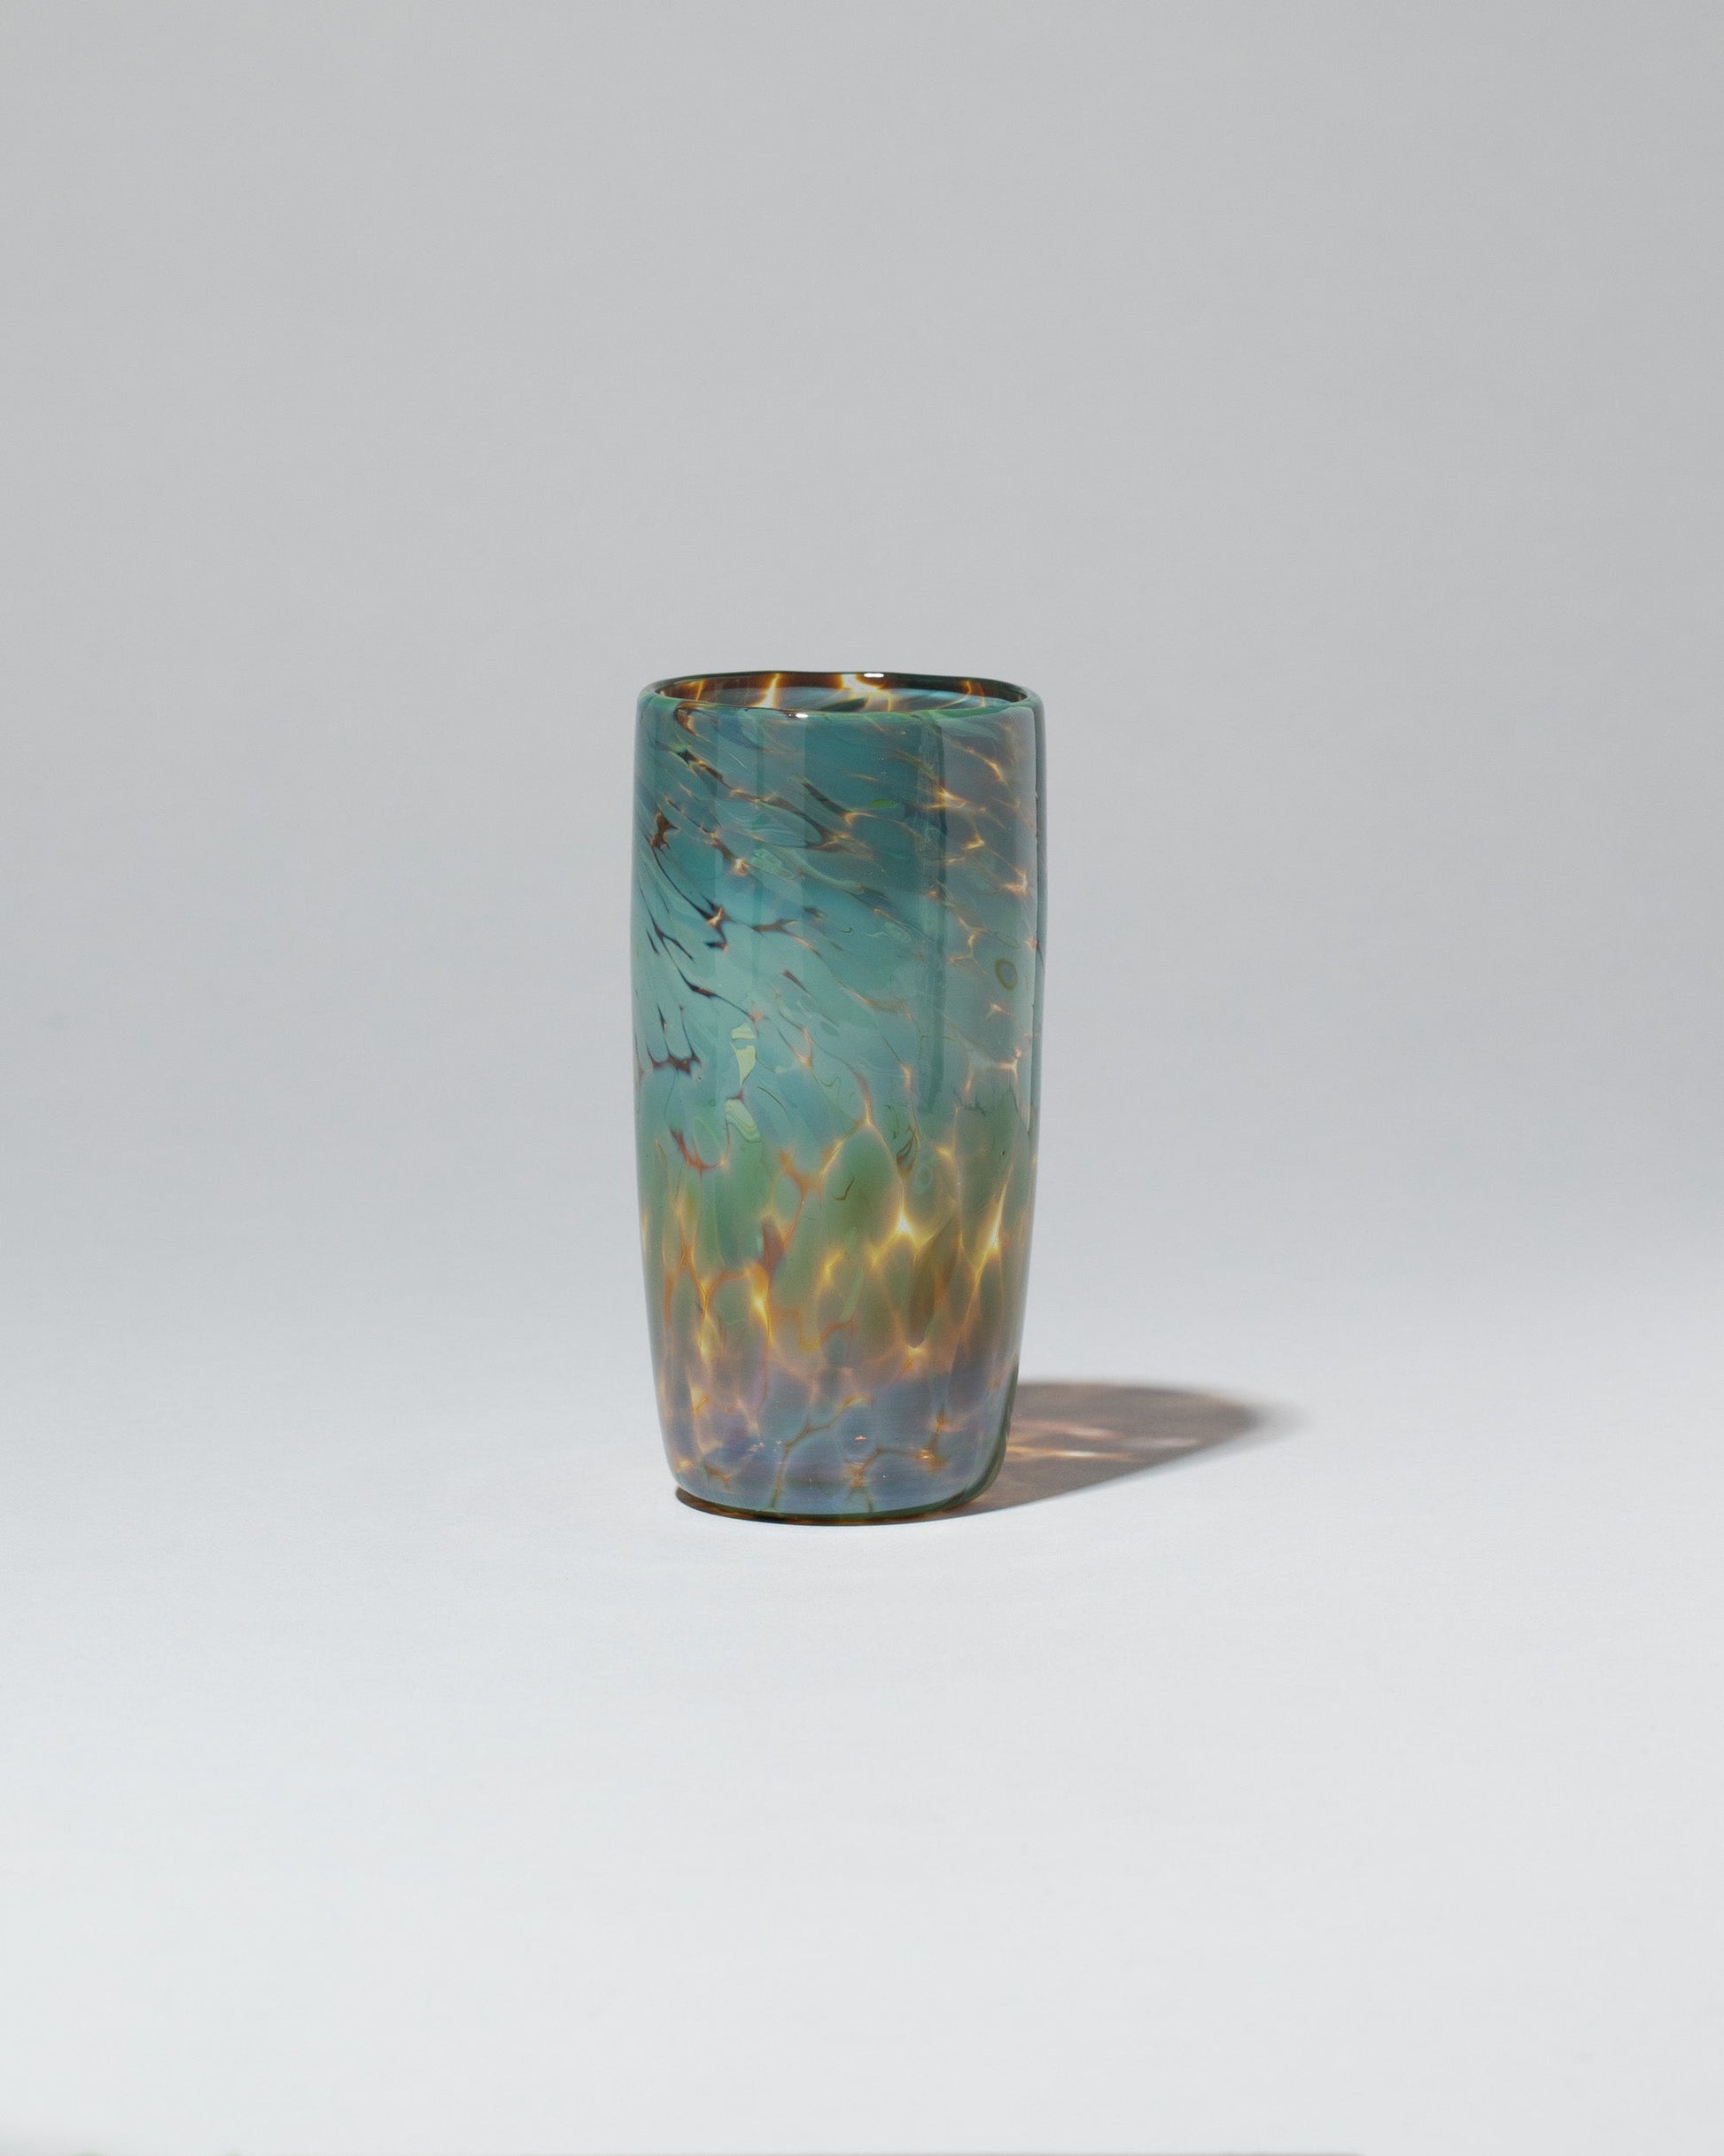 Product photo of the Seascape Cup on a light colored background